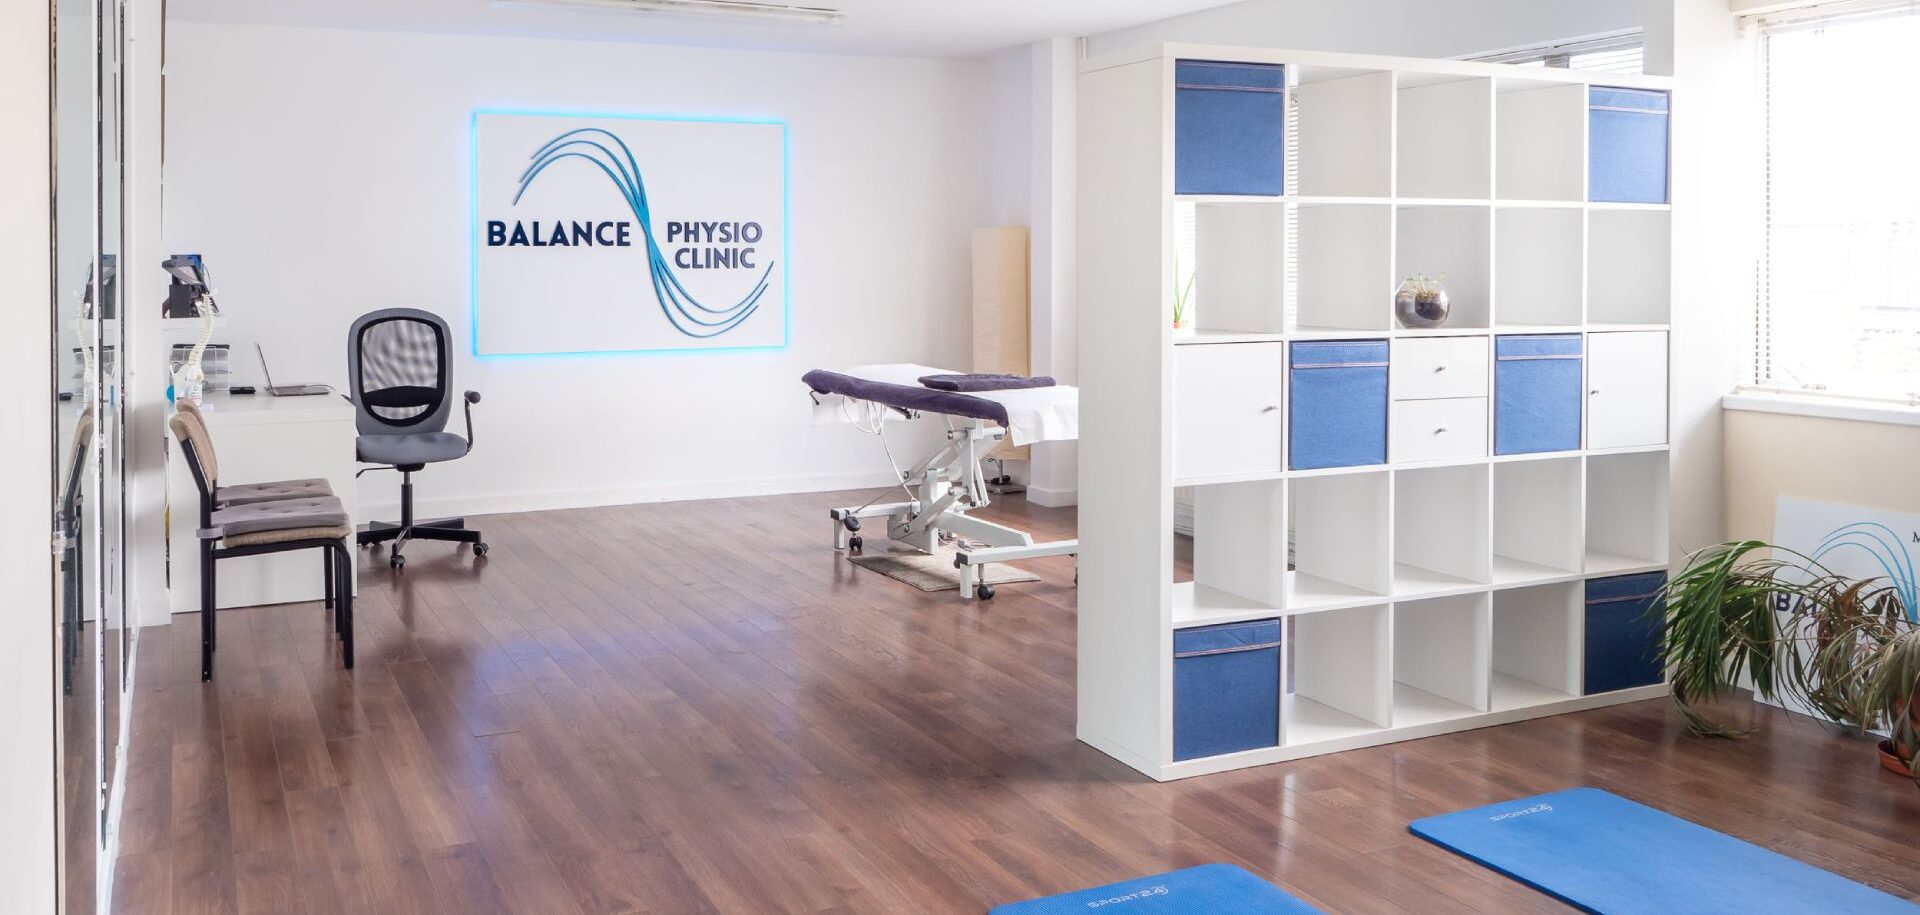 We are unique Physical Therapy / Physiotherapy Clinic